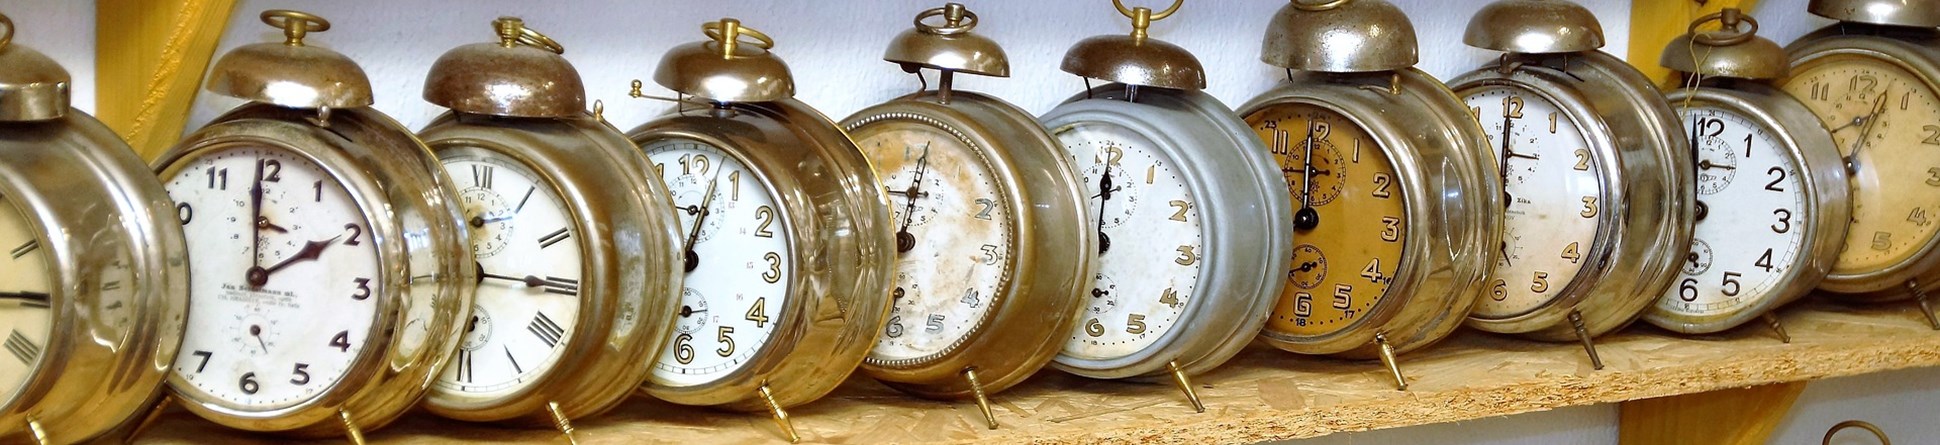 Image of old fashioned brass alarm clocks on wooden shelves.